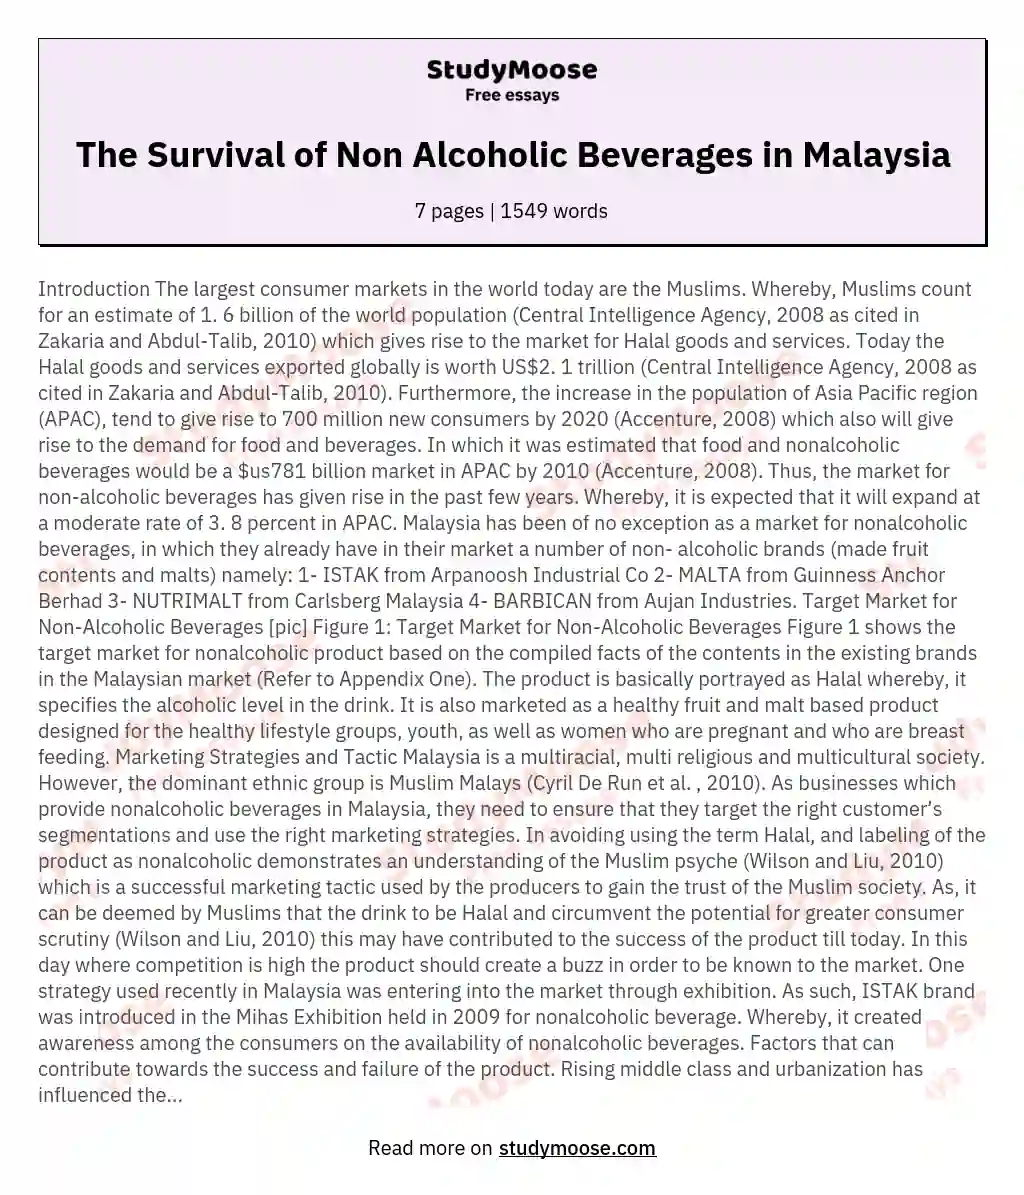 The Survival of Non Alcoholic Beverages in Malaysia